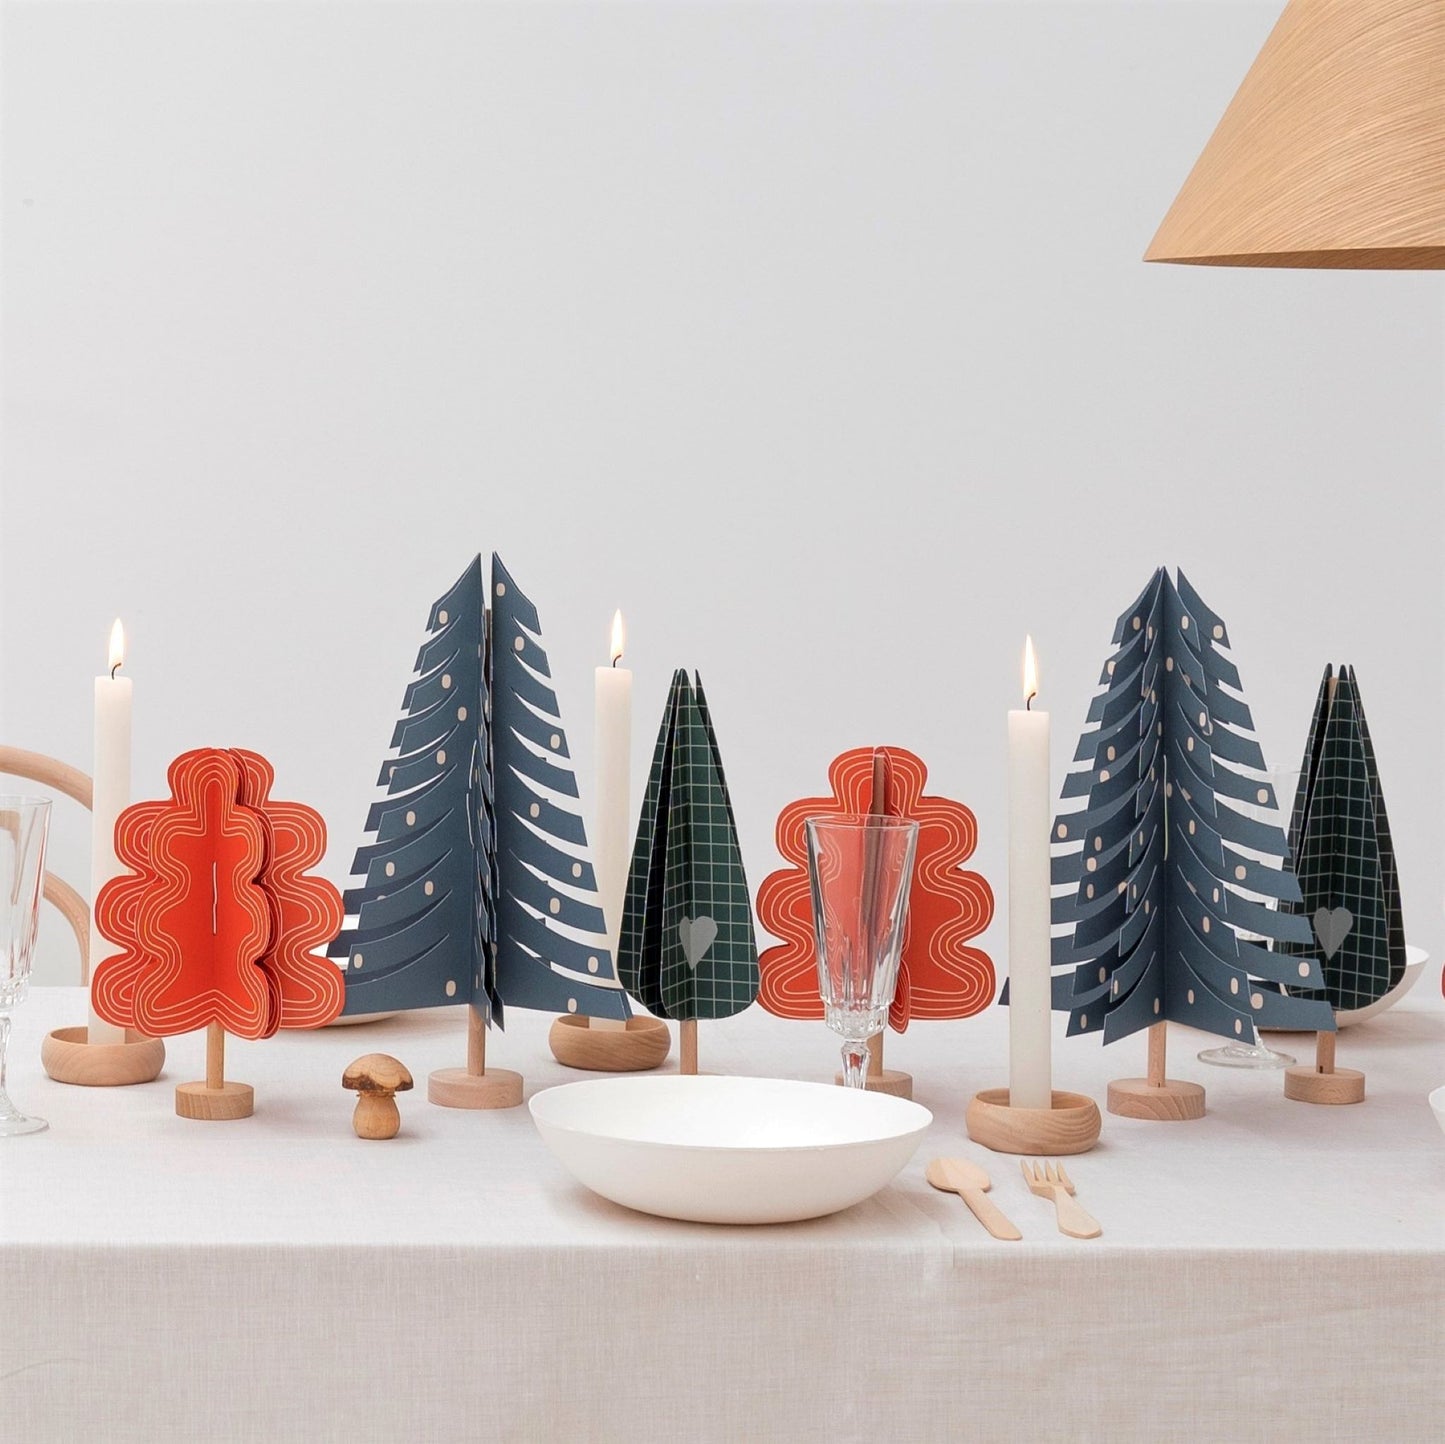 a red oak tree paper craft kit by Jurianne Matter, pictured with a group of paper trees on a table